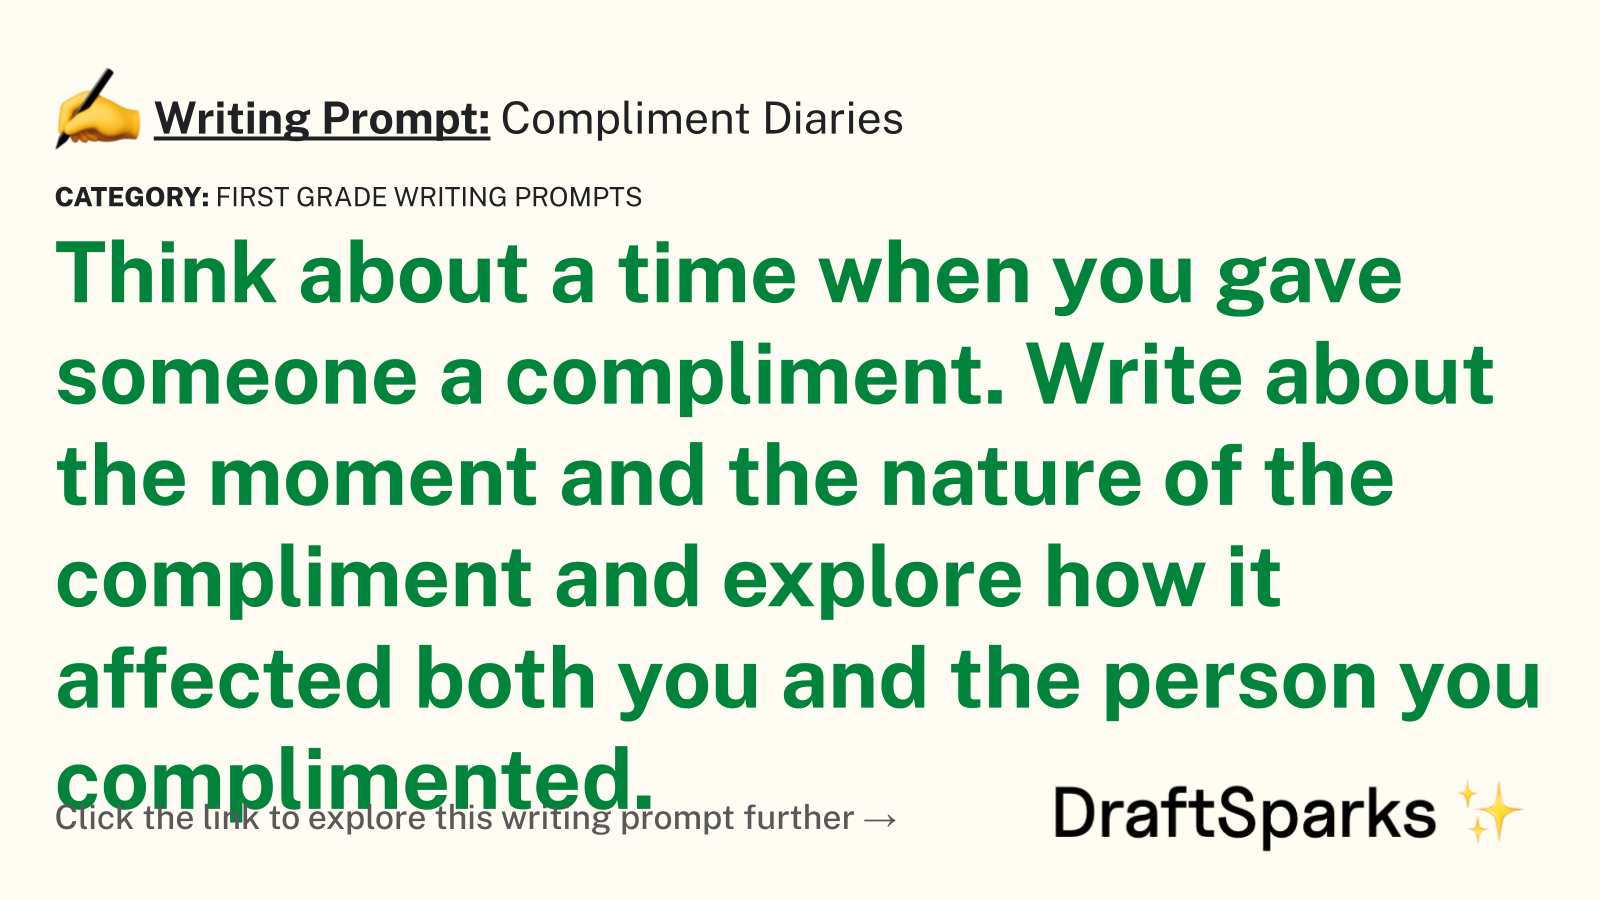 Compliment Diaries